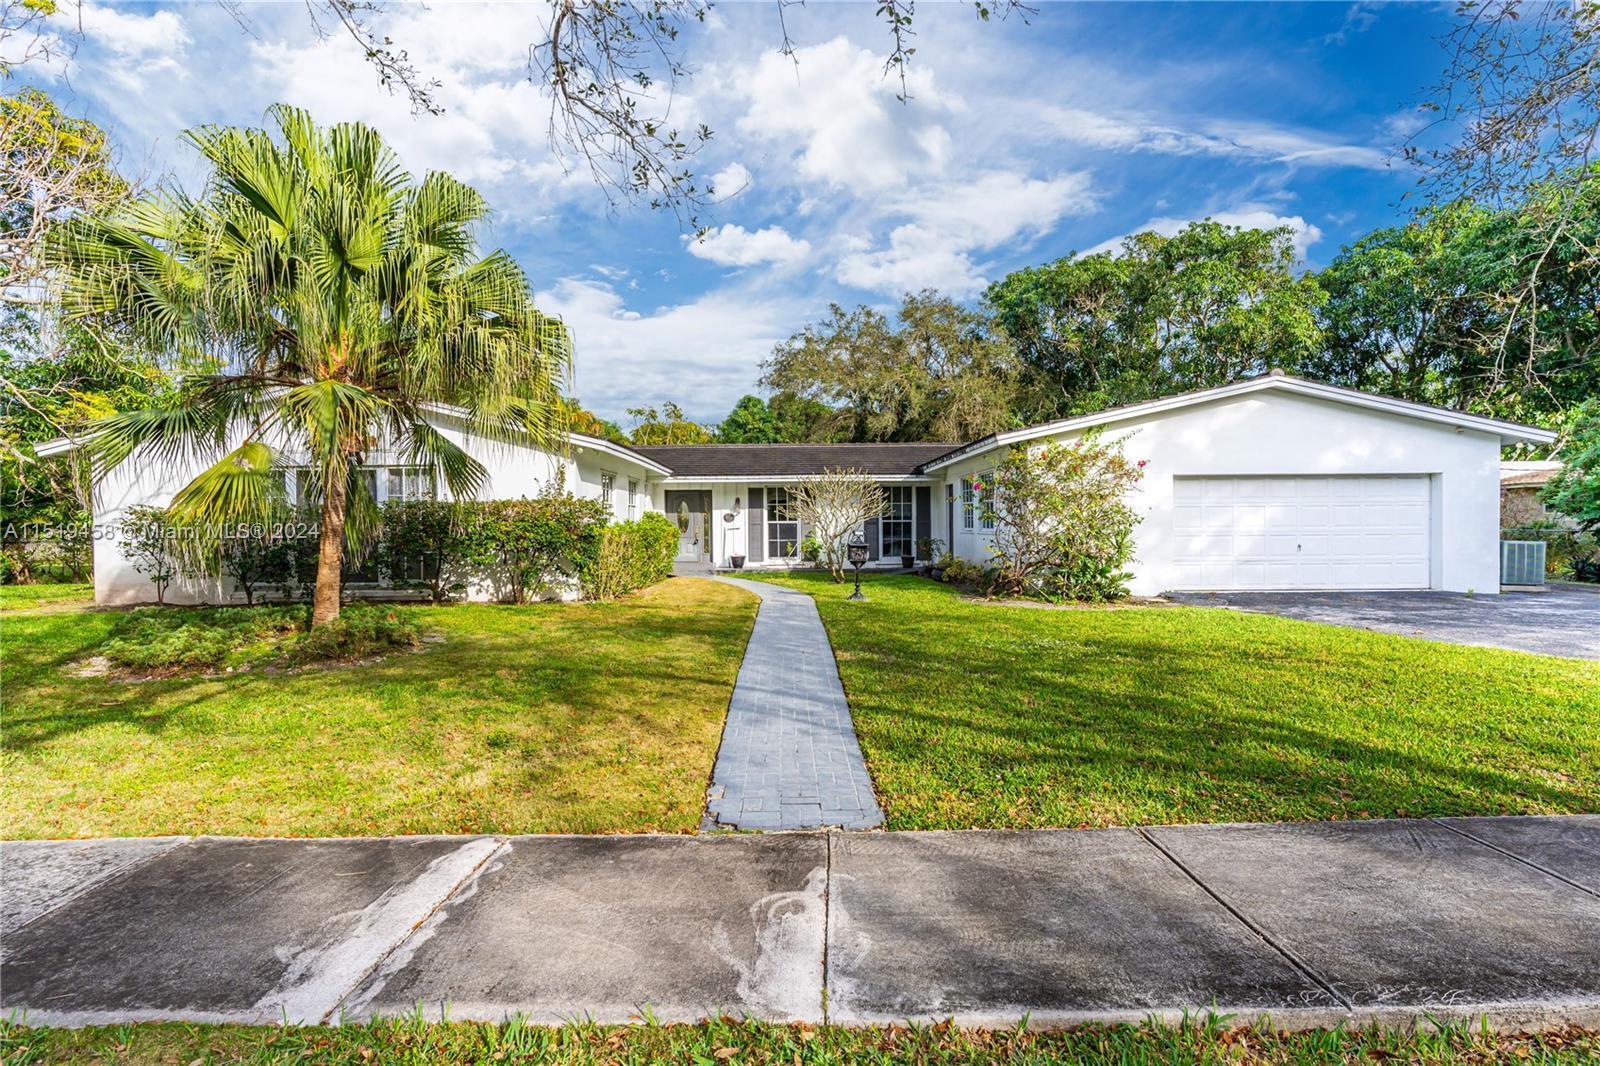 Large Single-family home located in Palmetto Bay. This property features 7 beds 4 baths and a 2 car 